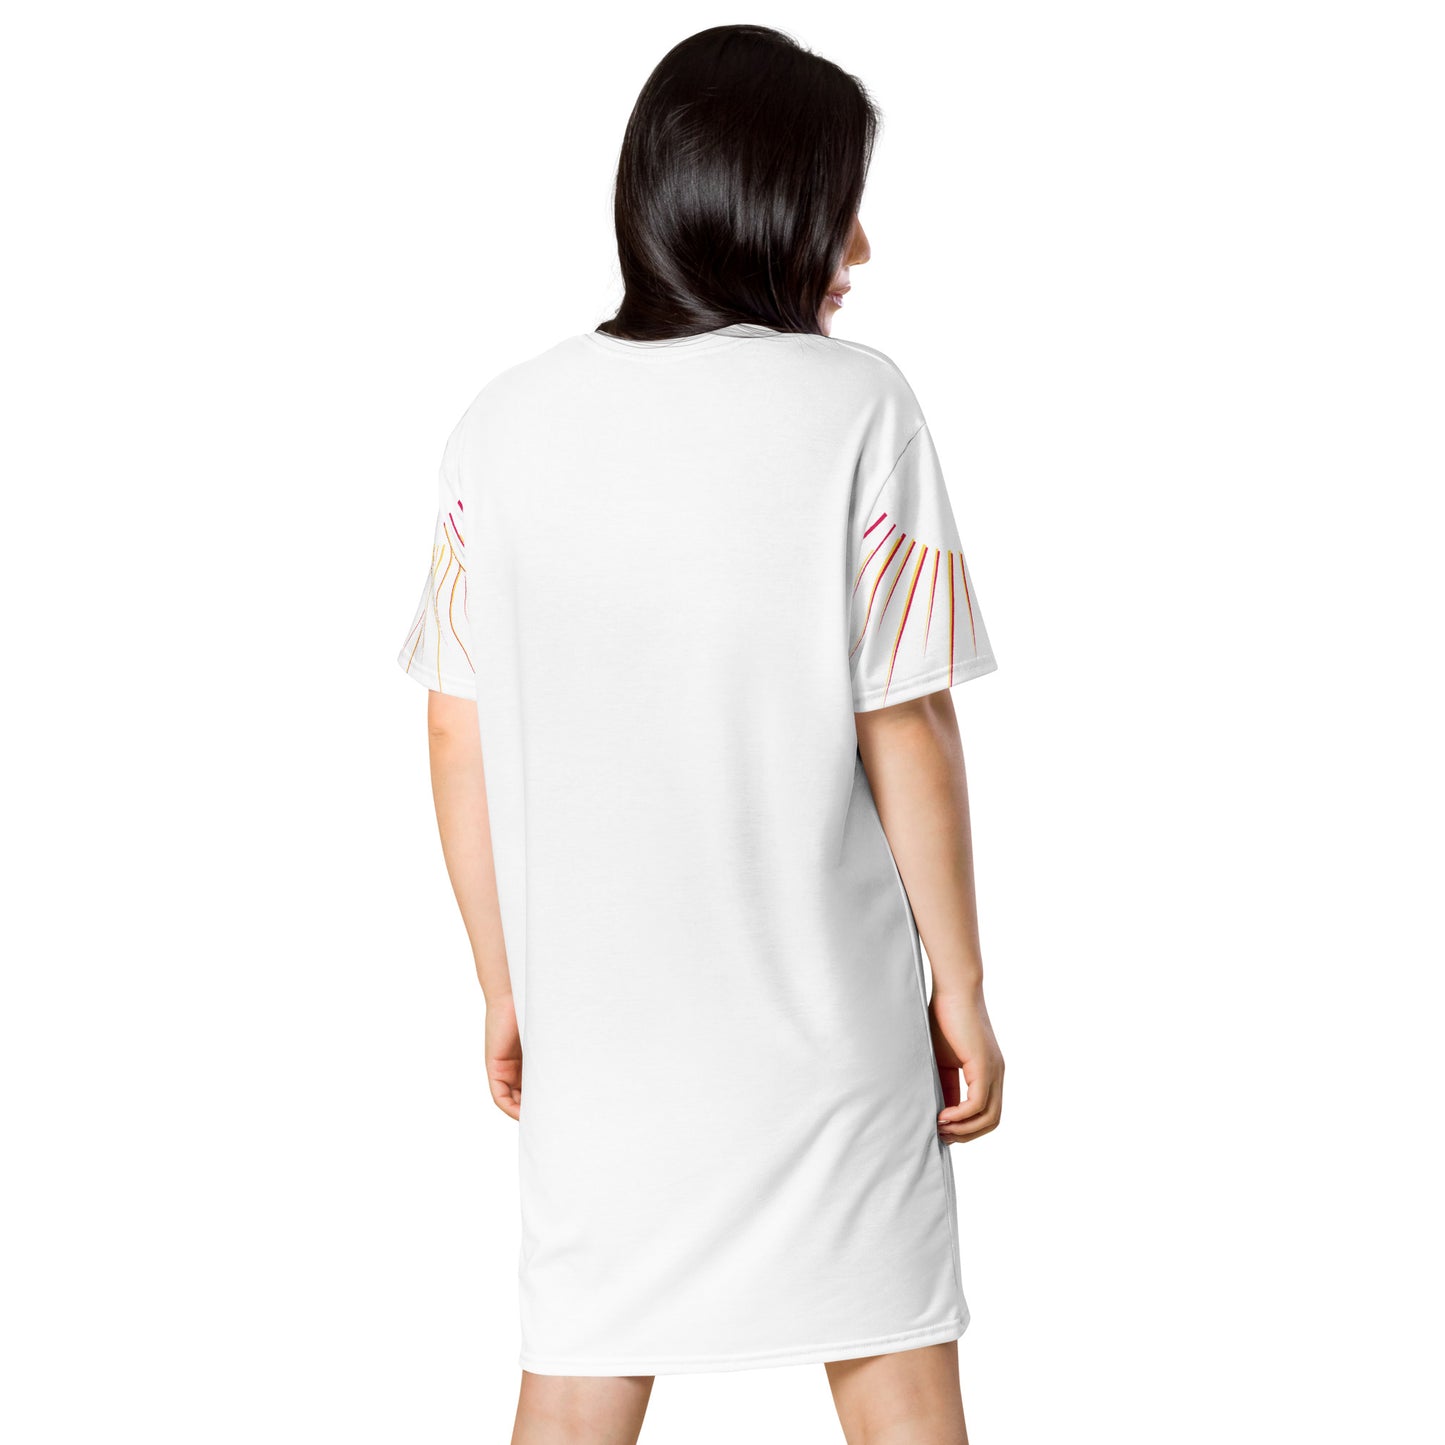 Growing and Glowing T-shirt Dress